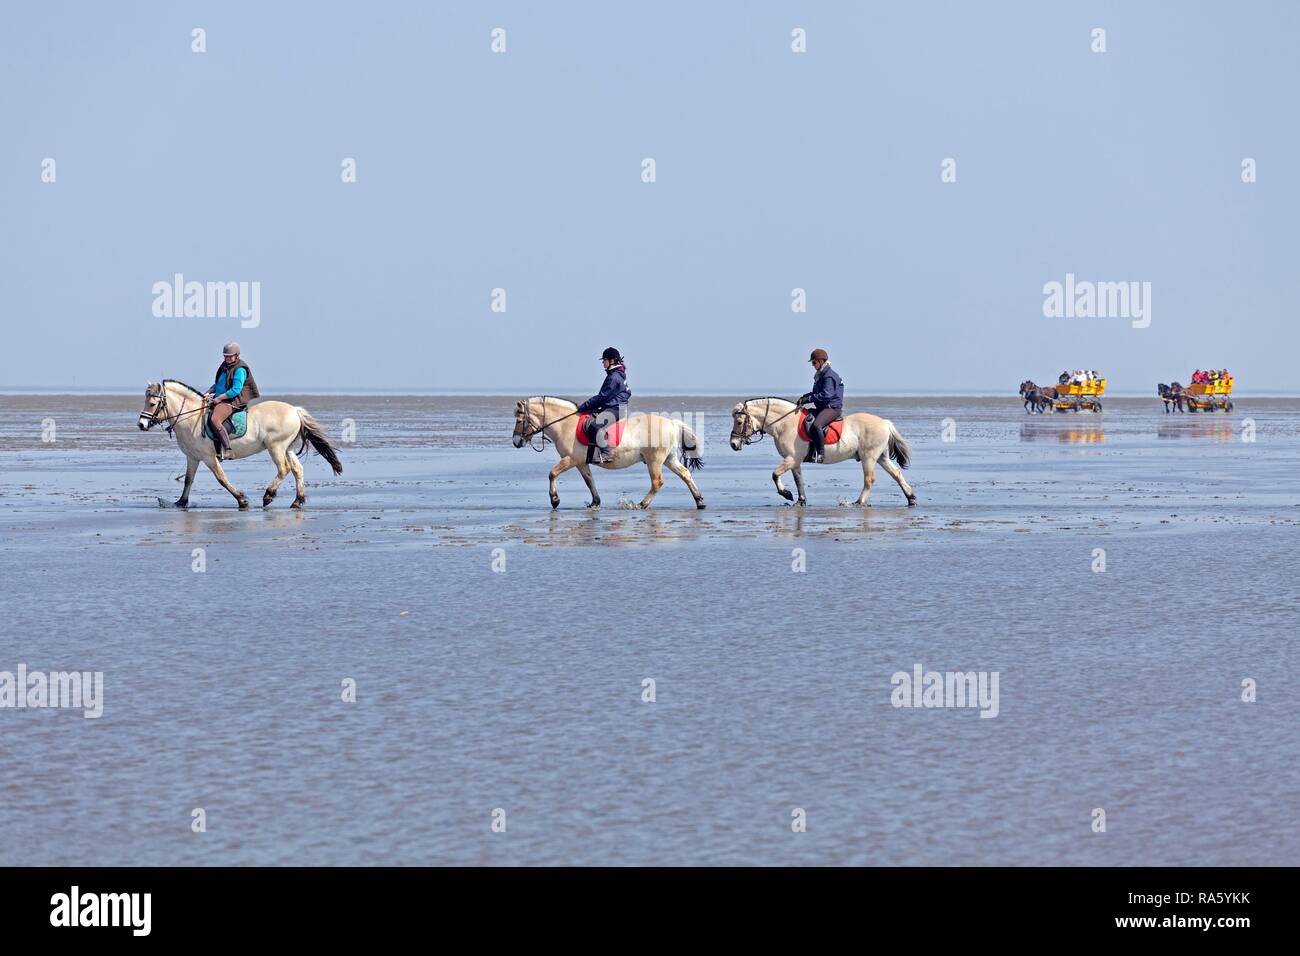 Horseriding in the mudflats, two horse-drawn carriages at the rear, Duhnen, Cuxhaven, Lower Saxony, Germany Stock Photo